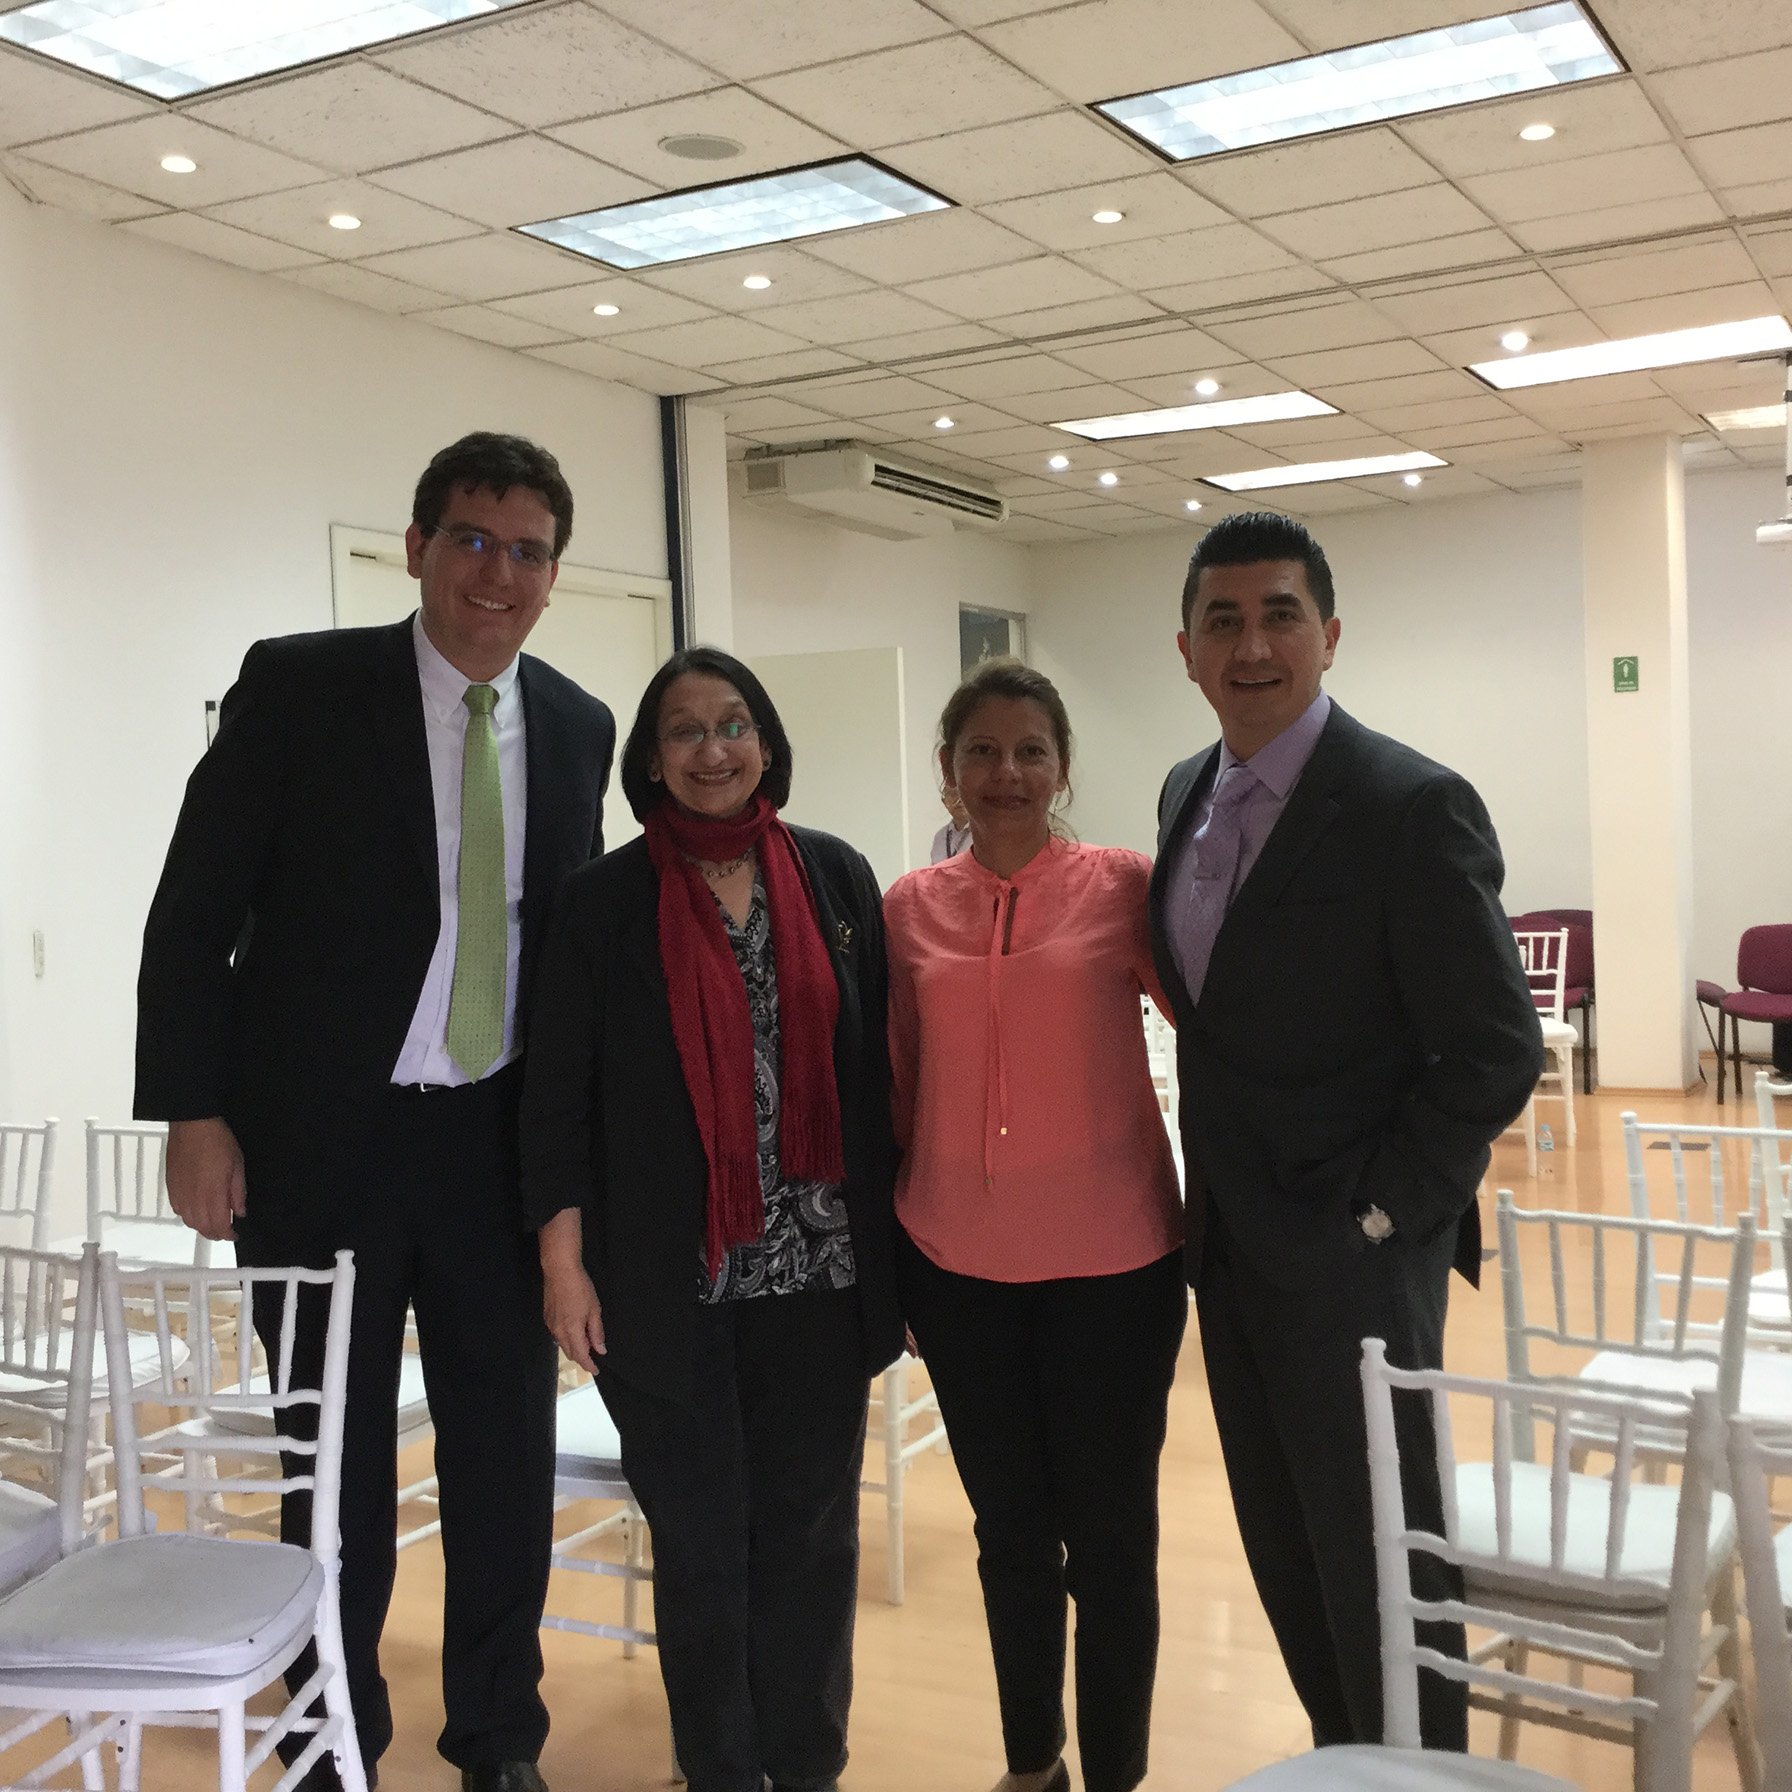 Workshops and interactions with CEVEVAL colleagues and visitors, Mexico, 2016